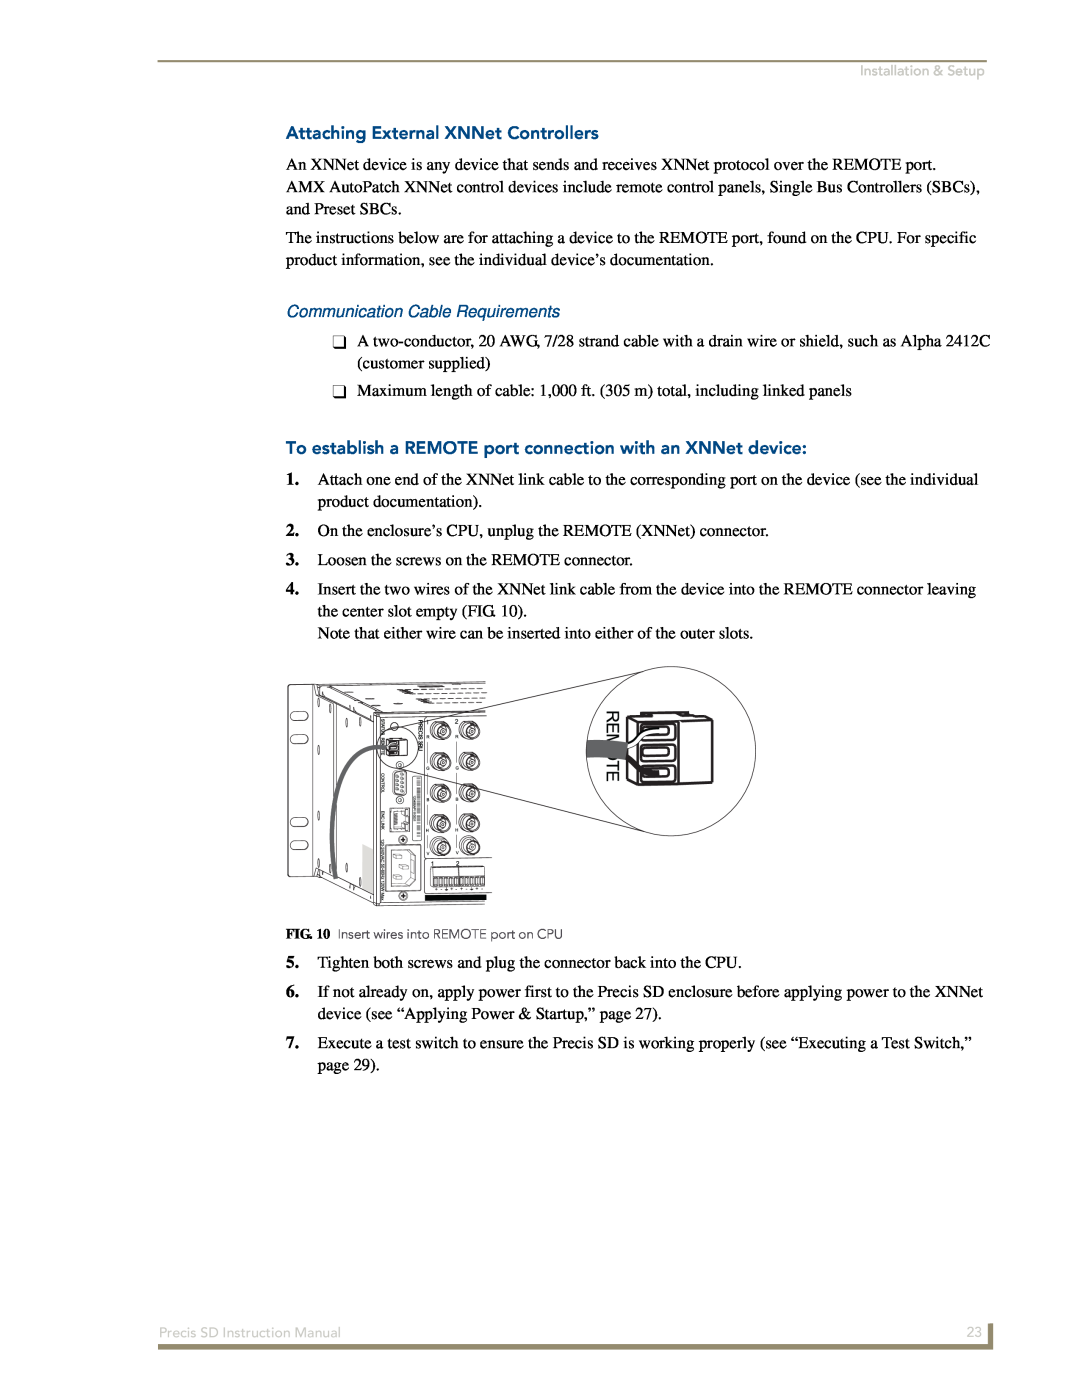 AMX Precis SD instruction manual Attaching External XNNet Controllers, Communication Cable Requirements 